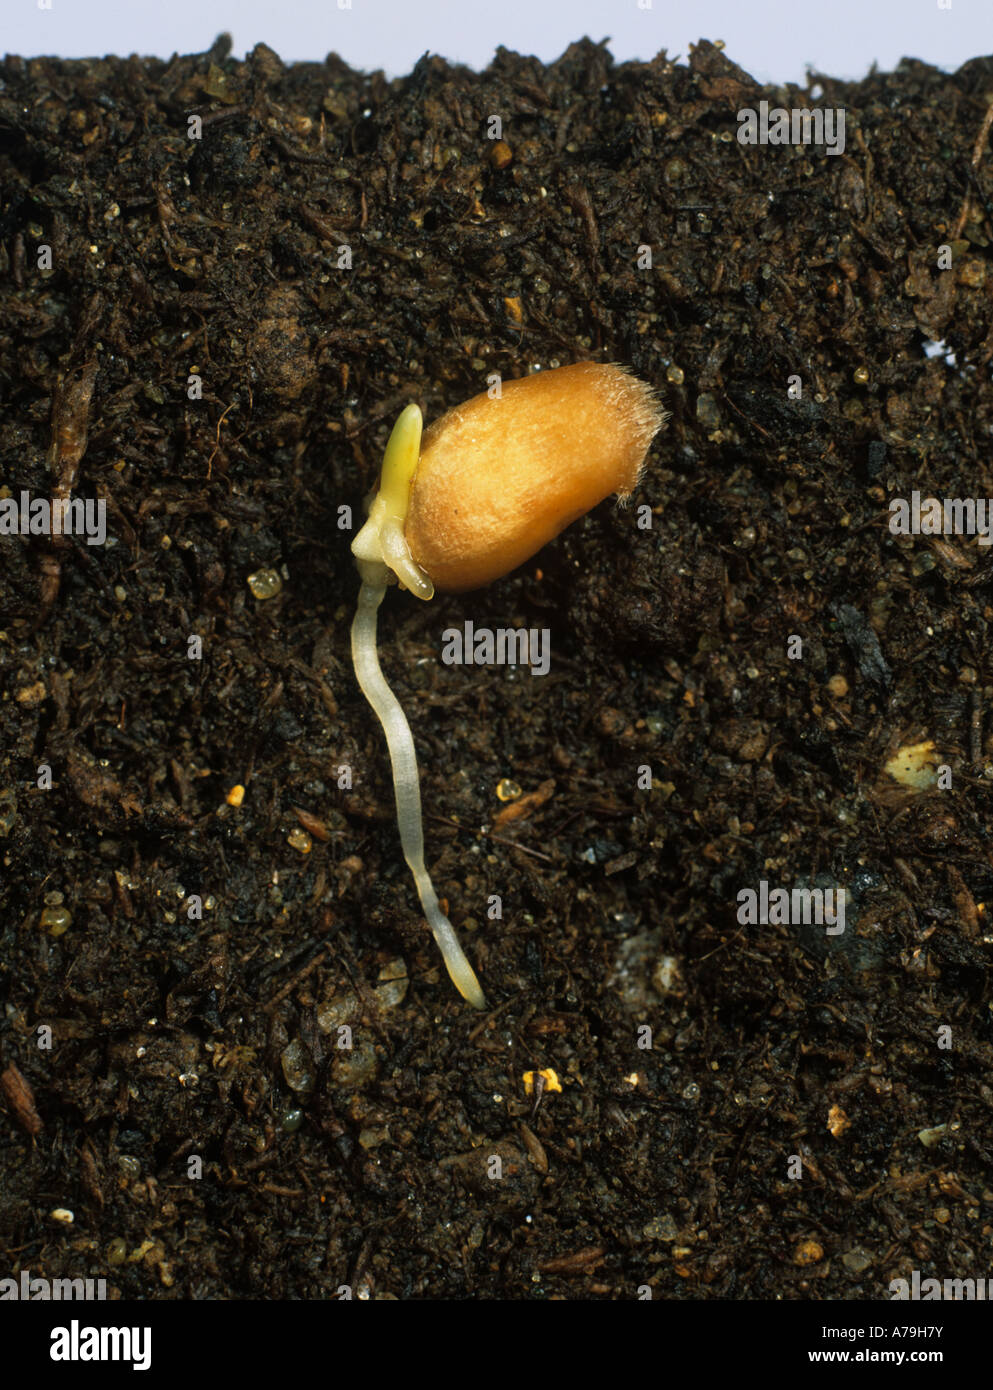 Germinating wheat seed with first root radicle and plumule emerging Stock Photo